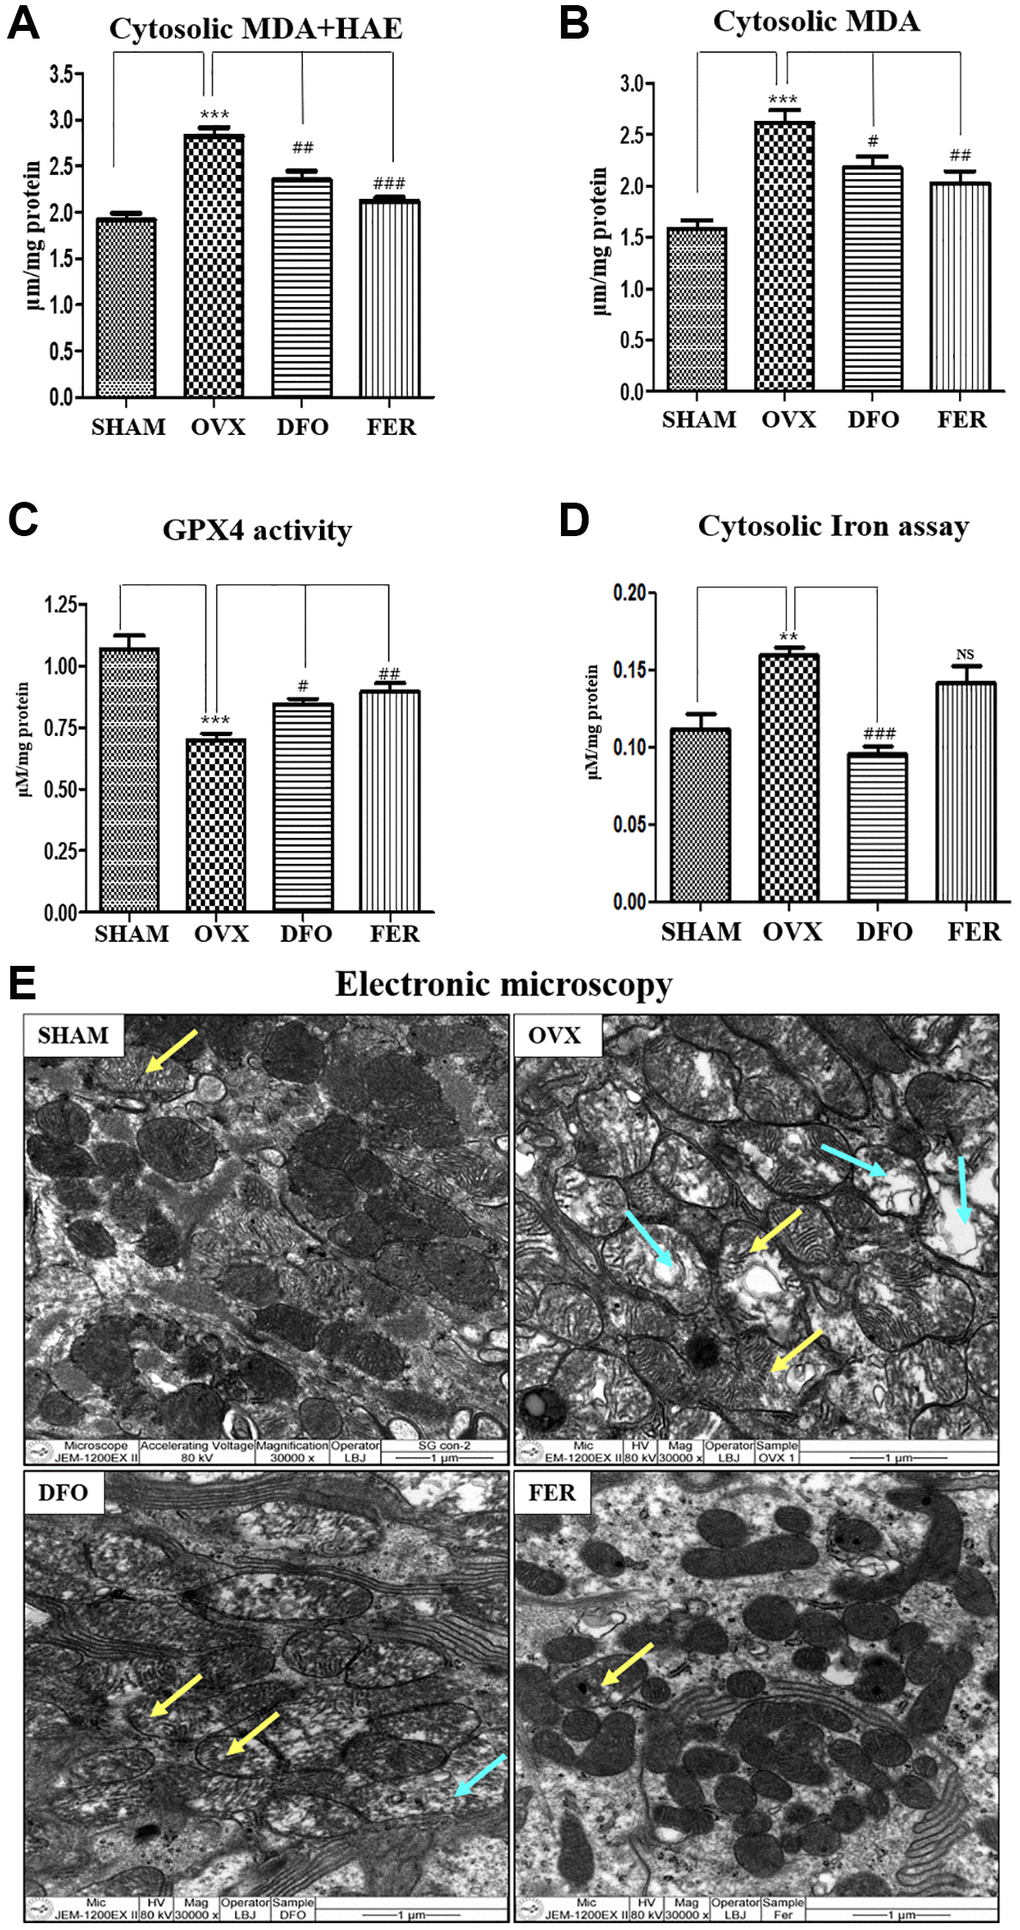 Inhibitory effect on ferroptosis. Cytosolic MDA (A) and cytosolic MDA + HNE (B) concentrations in the submandibular gland tissue. Compared to the SHAM group, the cytosolic MDA and MDA + HAE concentrations in the submandibular gland increased in the OVX group (p p p p p Figure 3A and 3B). (C) GPX4 activity. GPX4 activity was reduced in the OVX group (p p P D) Cytosolic iron content. Compared to the SHAM group, the cytosolic iron level increased in the OVX group and significantly decreased in the DFO group. (E) Electron microscopy images of mitochondria in the submandibular gland. The yellow arrow for indicating mitochondrial swelling, and blue arrow for indicating mitochondrial degeneration In the SHAM group, there was clear condensation of mitochondria and the shape was normal, but in the OVX group, the shape was irregular and the integrity was decreased. In the DFO and FER groups, mitochondrial recovery could be confirmed morphologically. Two-way ANOVA was performed. **p ***p #p ##p ###p 